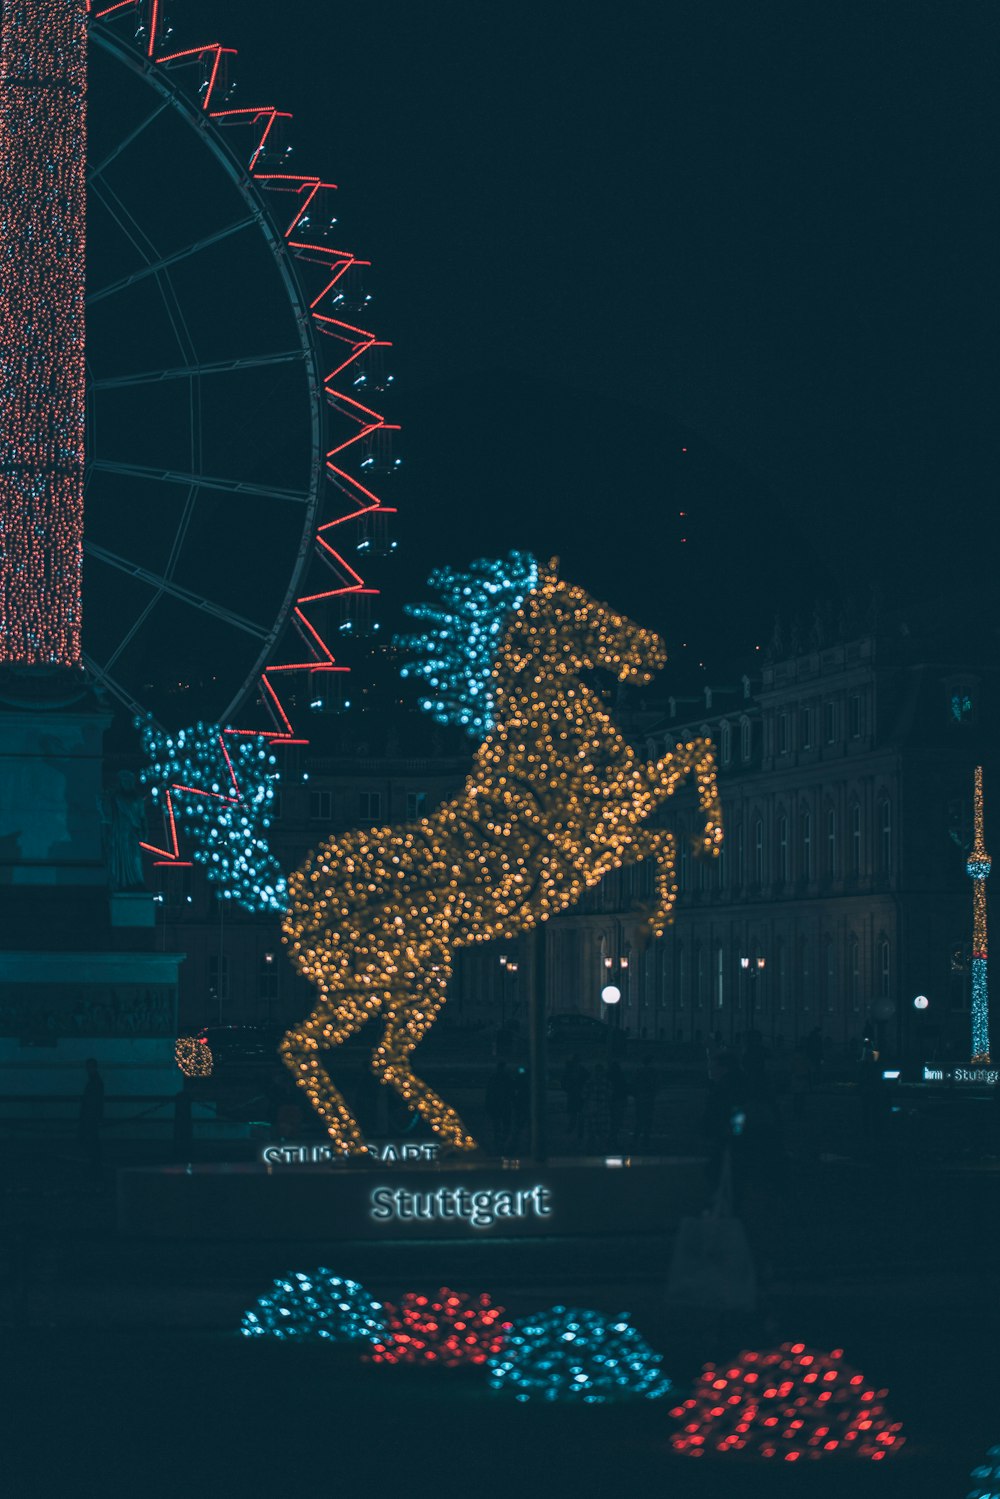 a statue of a horse with a ferris wheel in the background